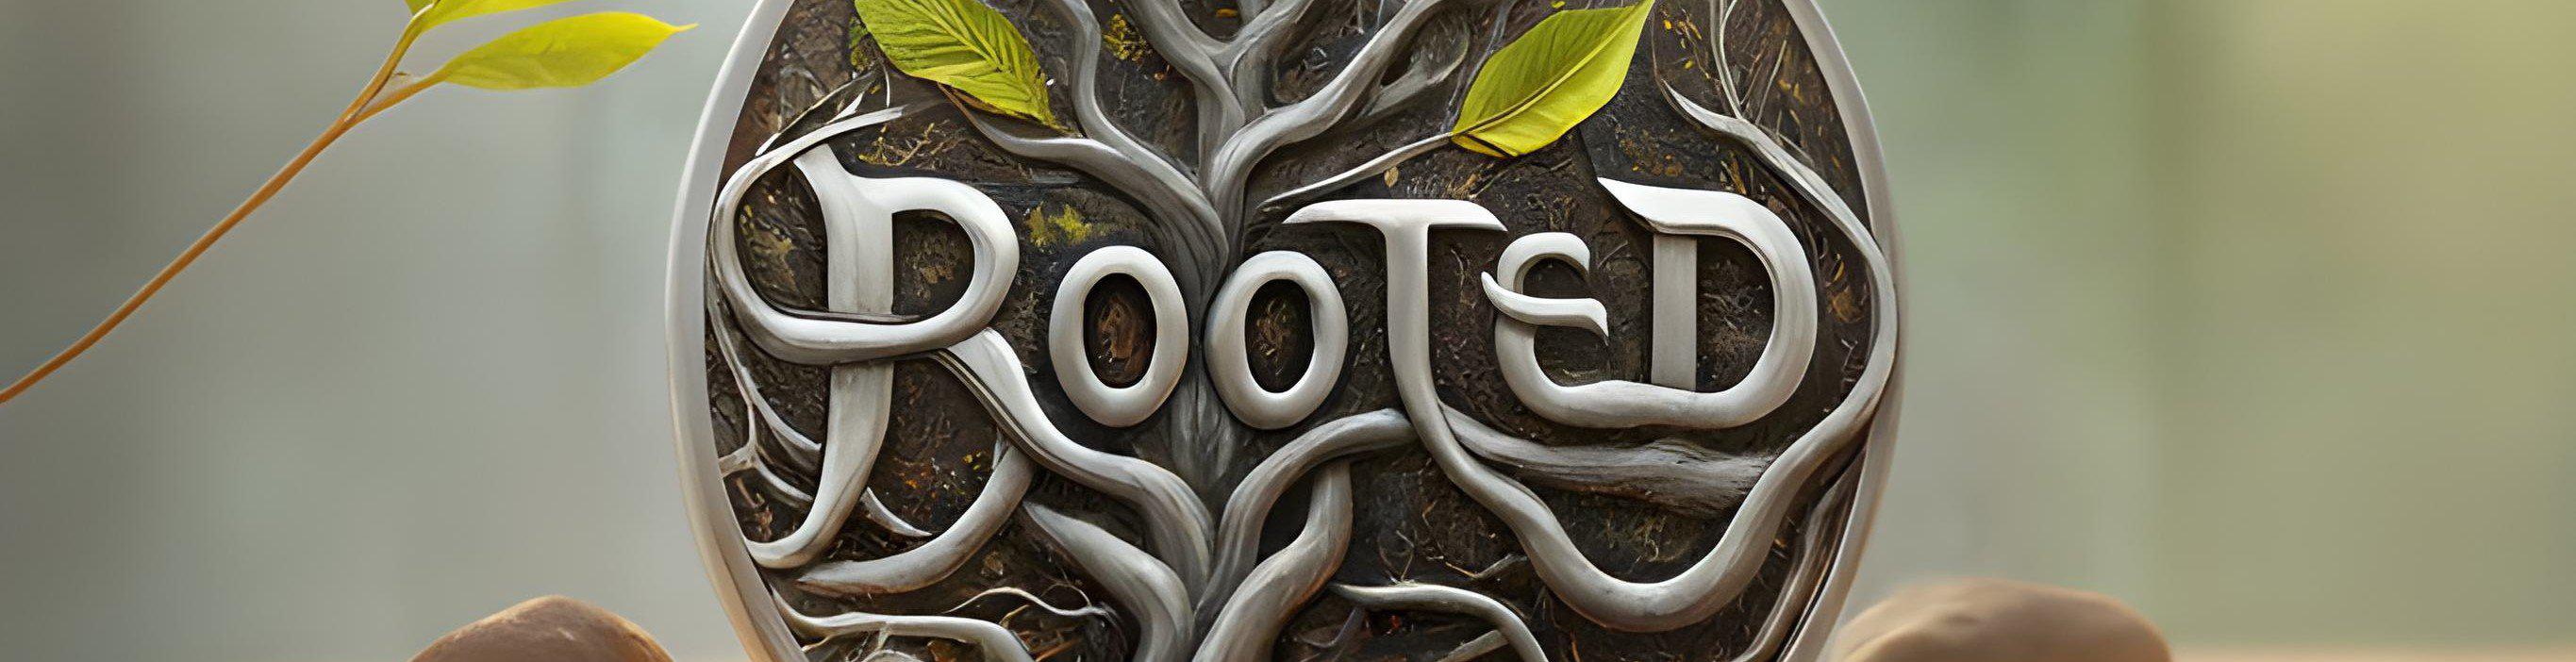 Rooted by Danny Goldsmith : newdlmagicstore